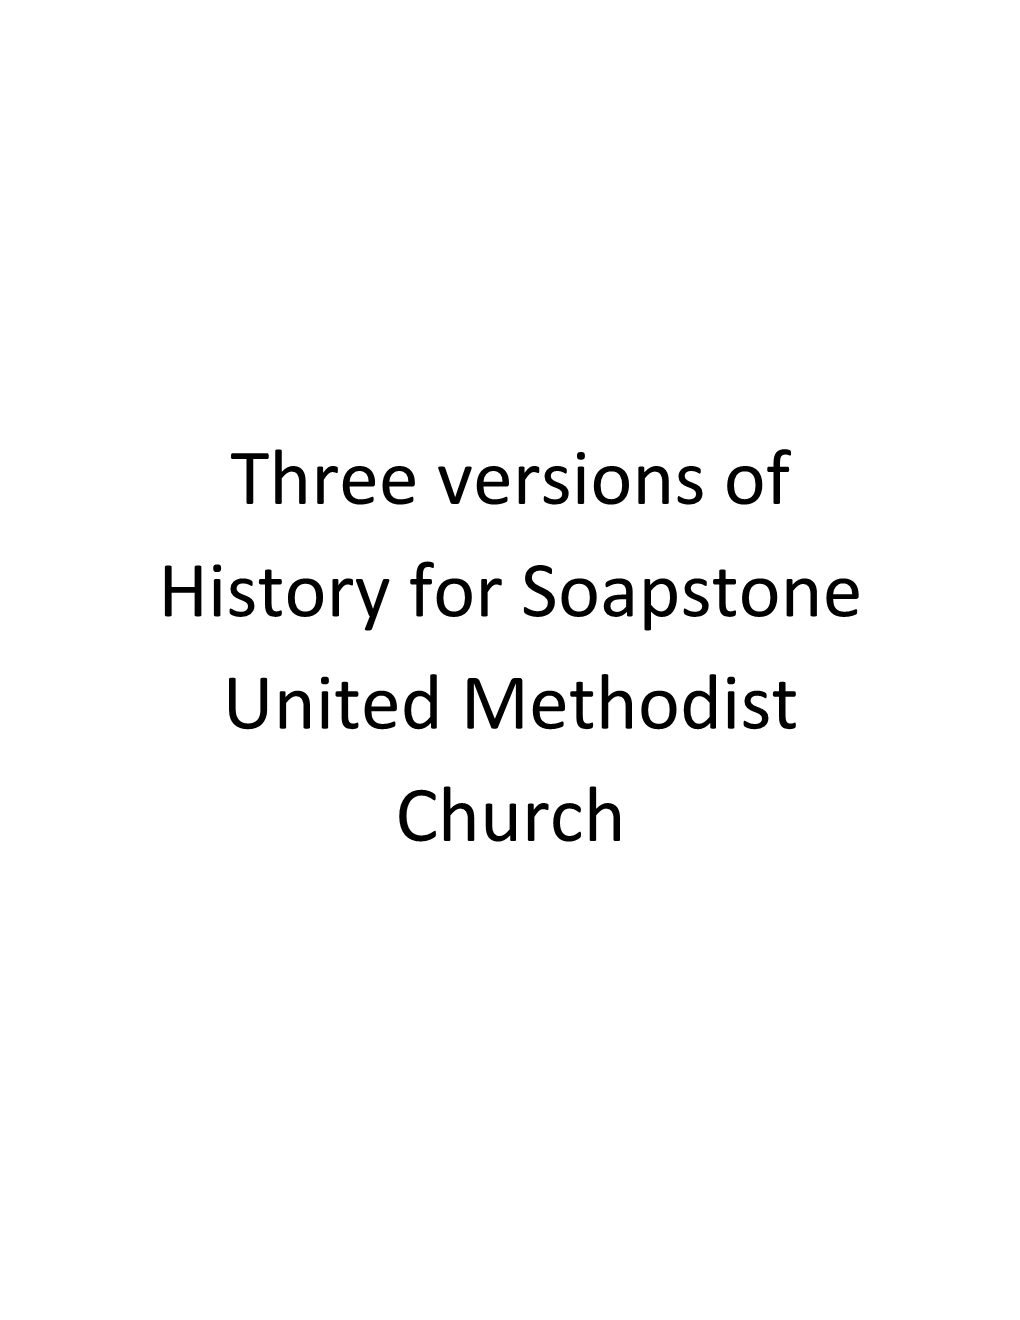 Three Versions of History for Soapstone United Methodist Church the History of Soapstone